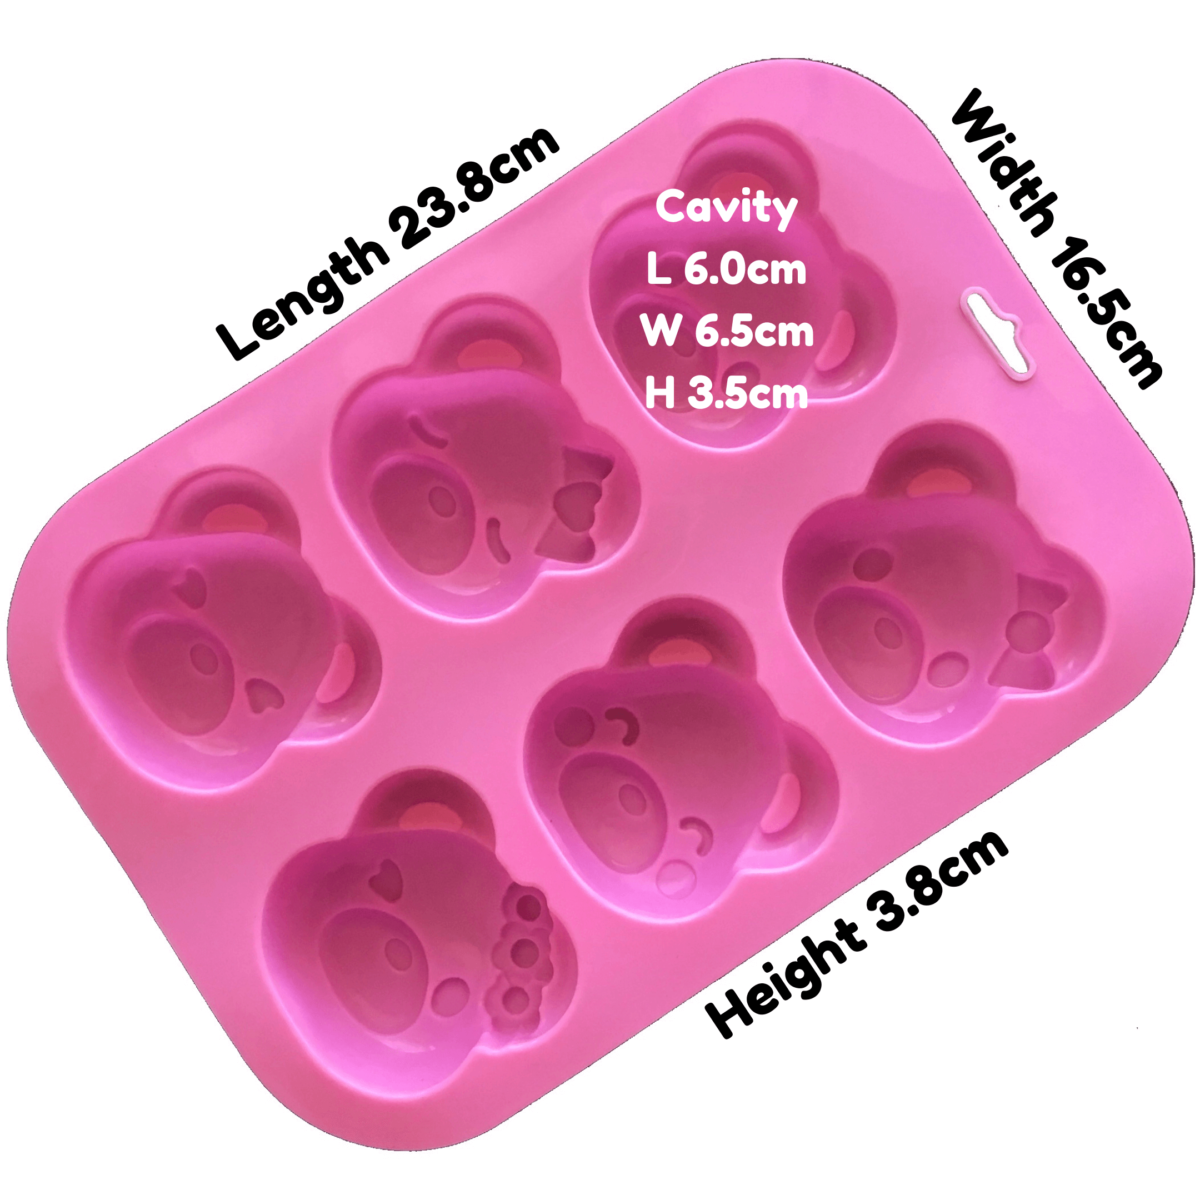 written dimensions of pink six cavity silicone mould with teddy bear head-shaped cavities each with an individual facial expression